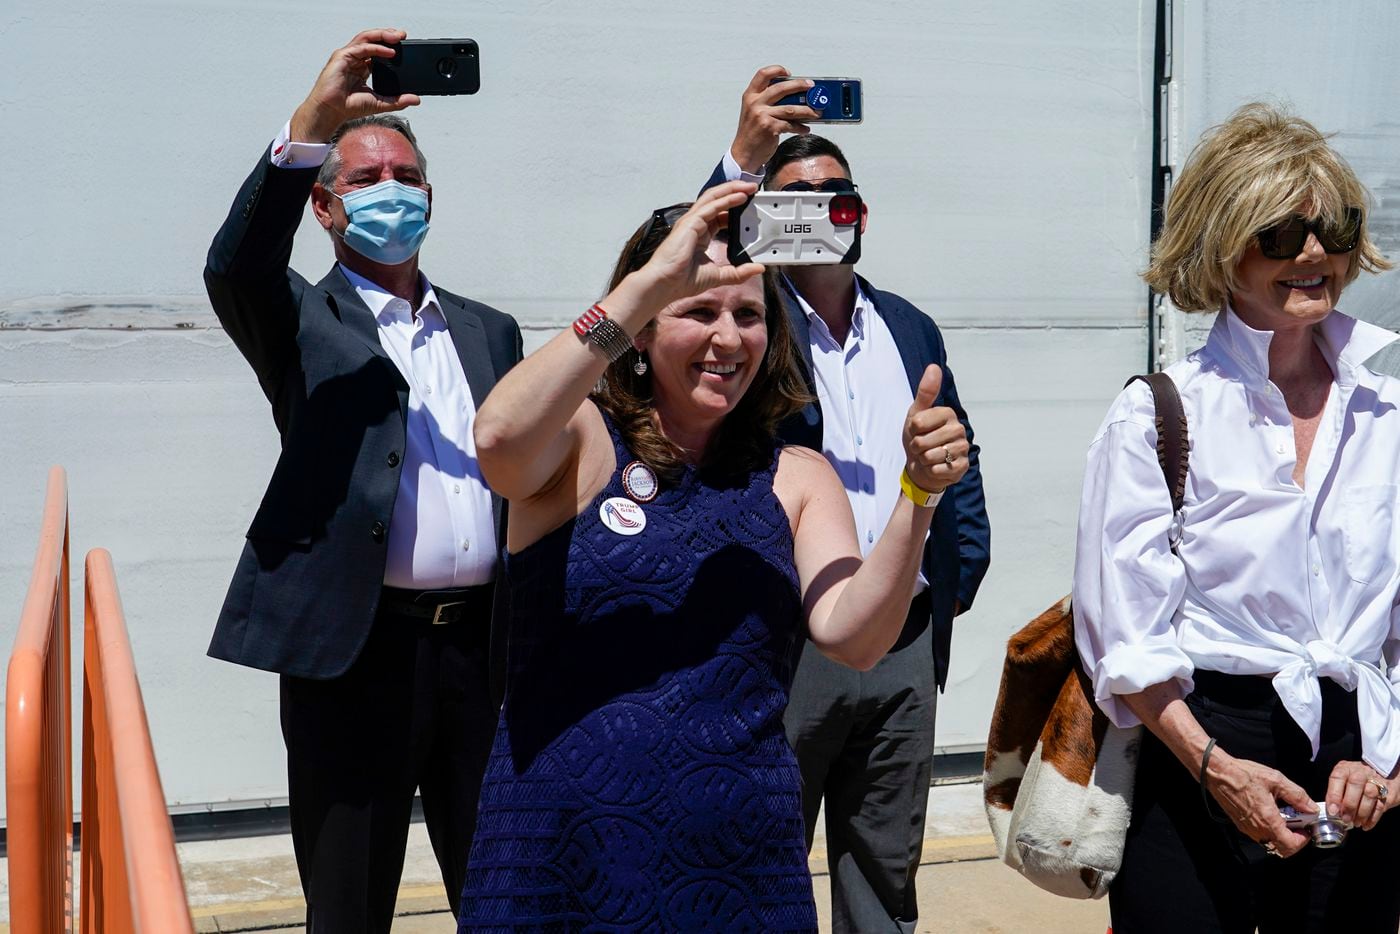 Supporters cheer President Donald Trump as he arrives at Dallas Love Field on Thursday, June 11, 2020, in Dallas. (Smiley N. Pool/The Dallas Morning News)